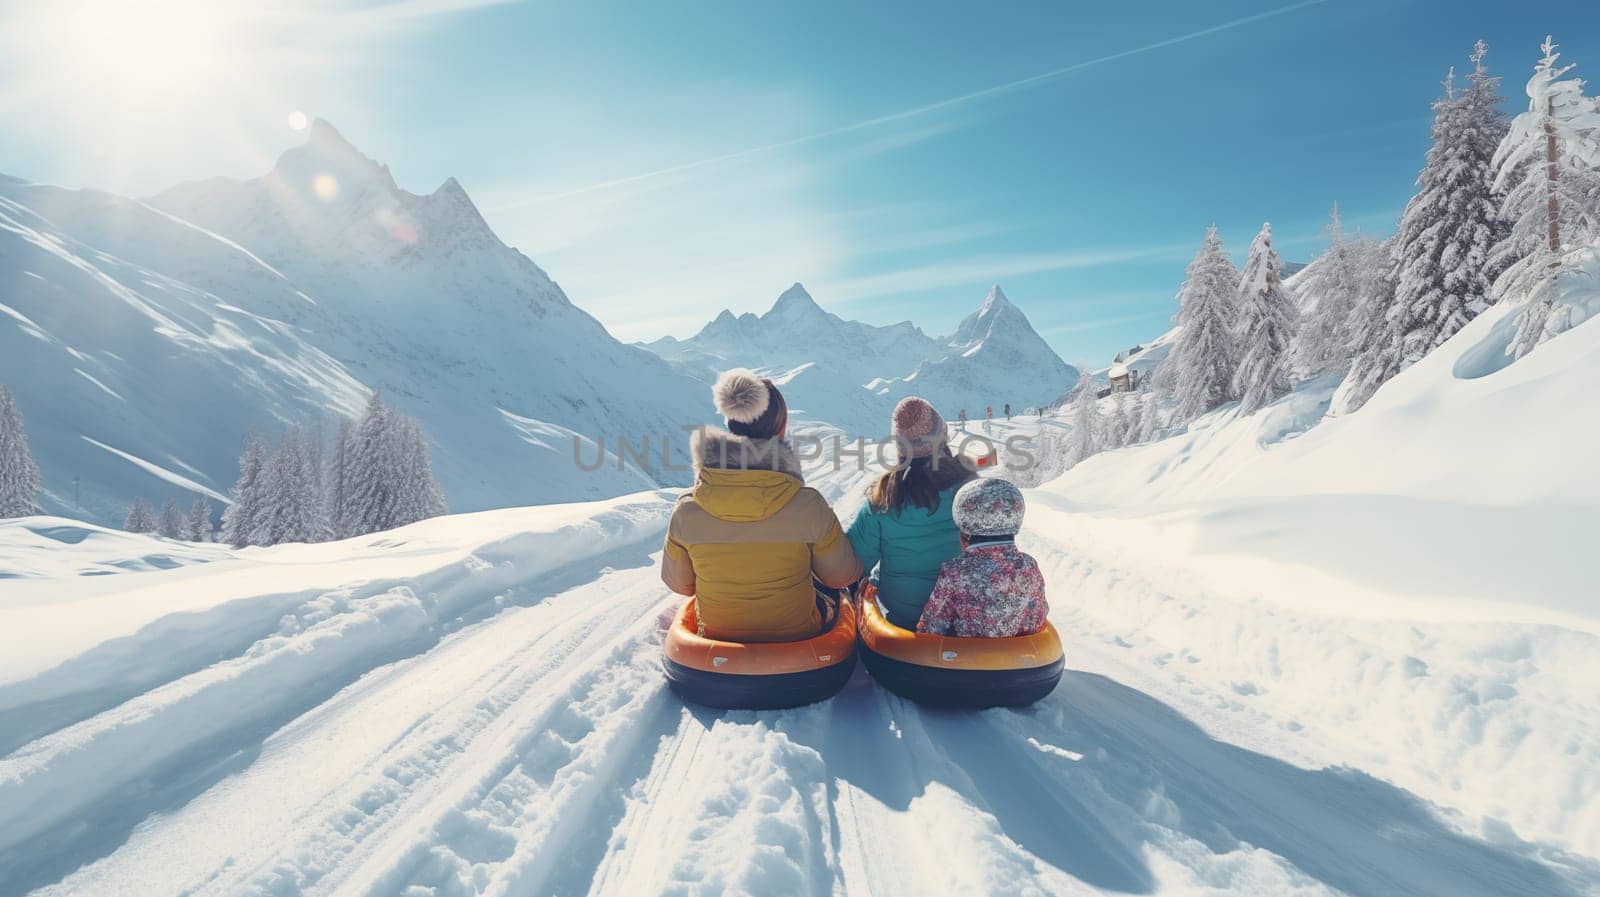 Family tubing down a snowy hill with mountain backdrop,rear view.